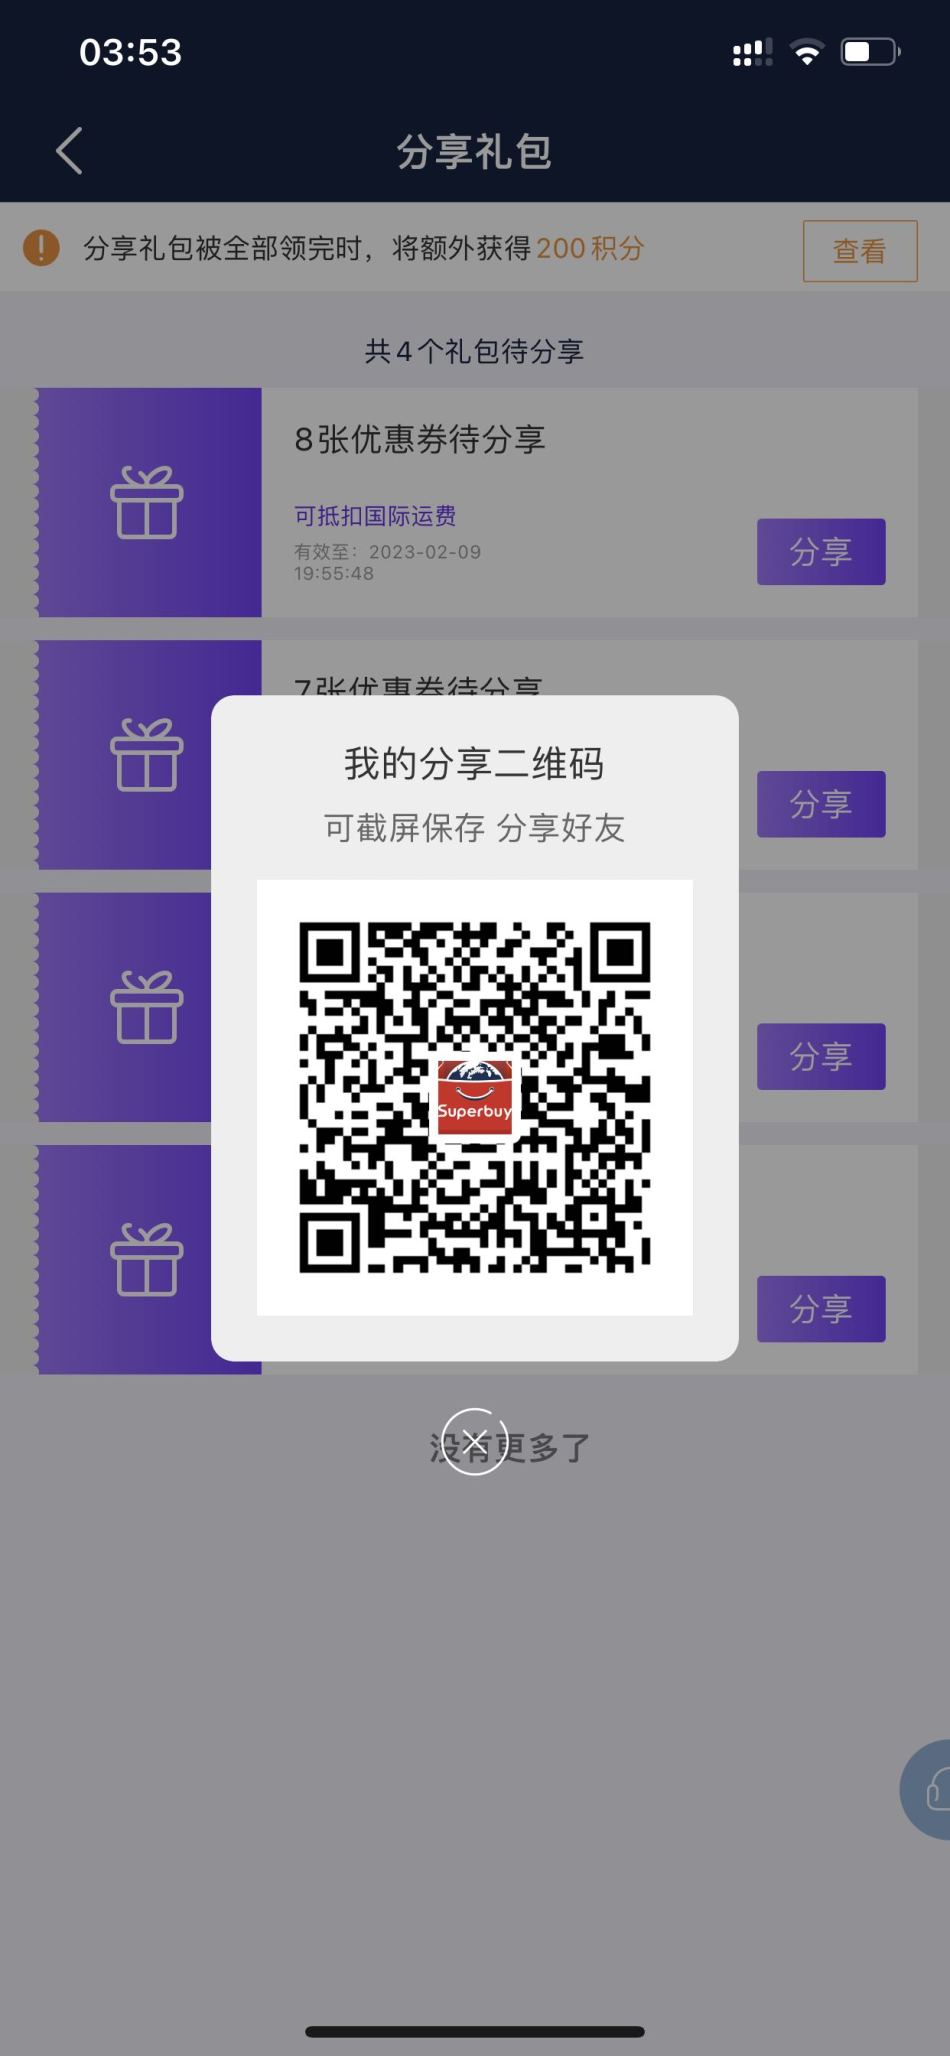 https://img1.superbuy.com/images/consult/2022/03/03/72697213ceee036a576243880dfba322.jpg?x-oss-process=image/resize,w_950